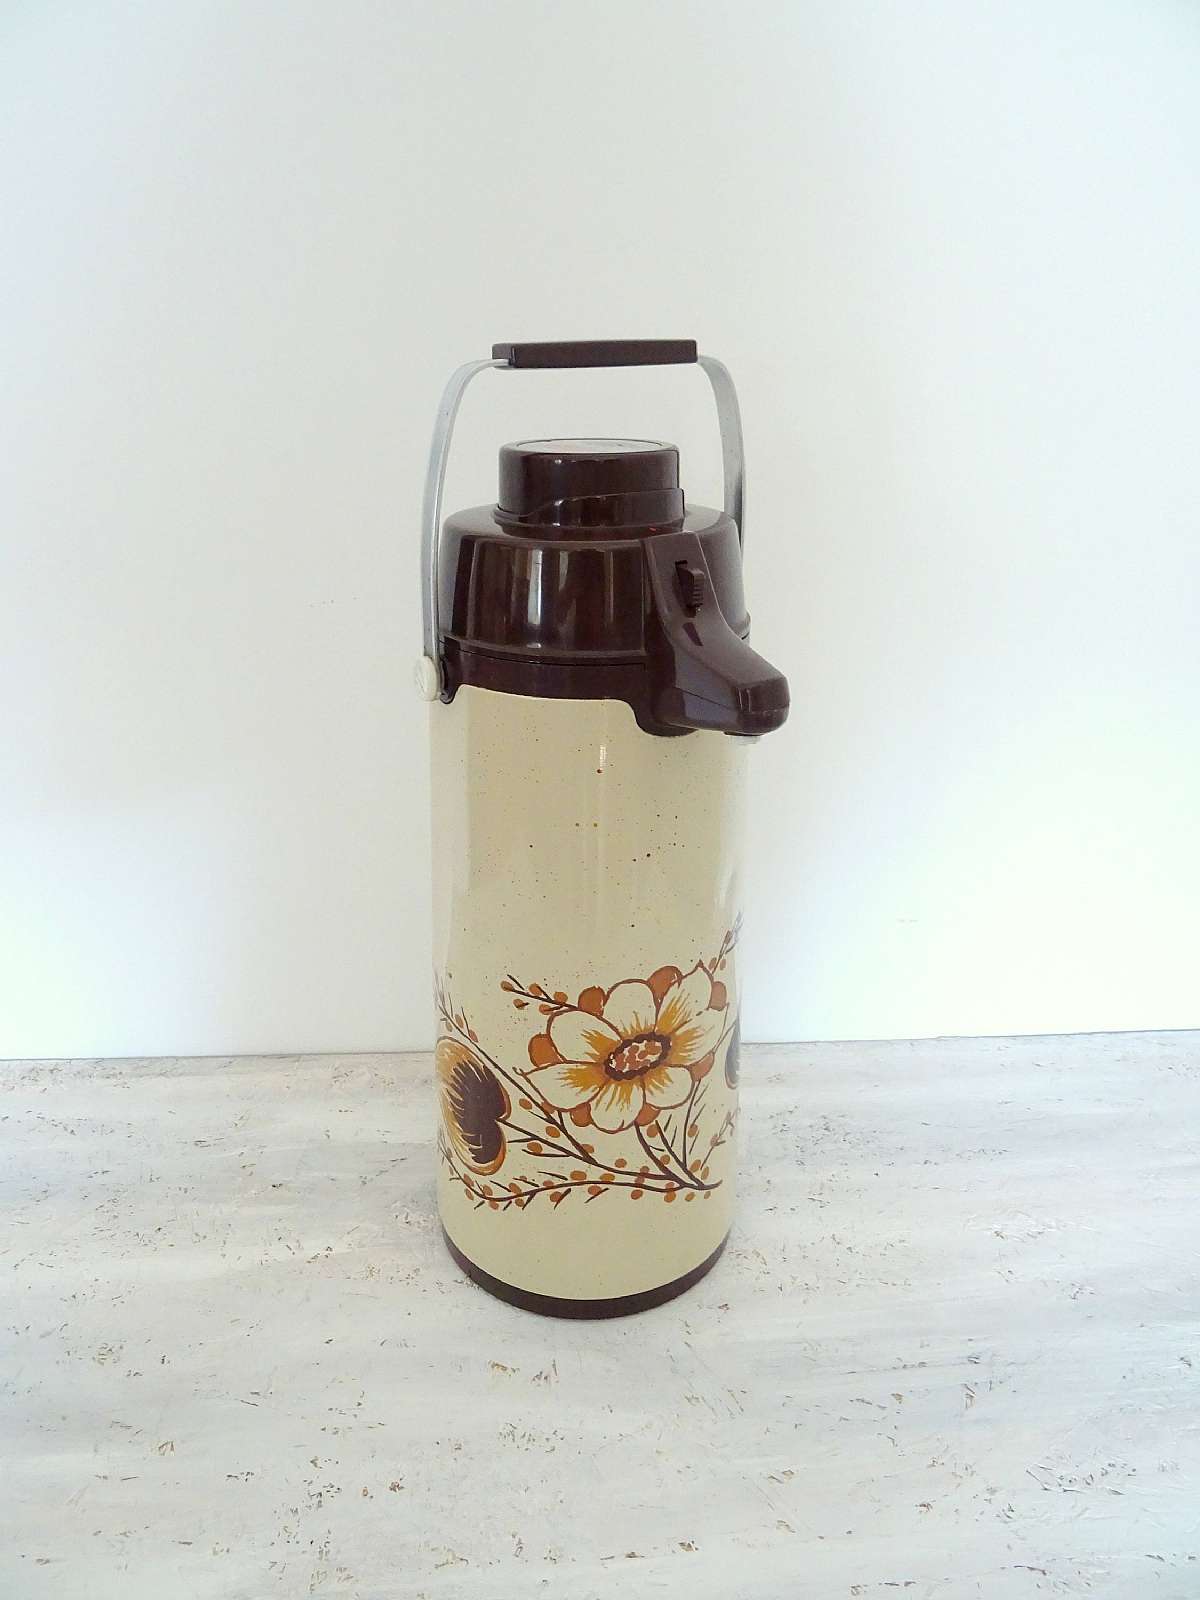 From 80's Thermos Bottle Cold Hot Water Retro Vintage Drink Container Home  Decor 